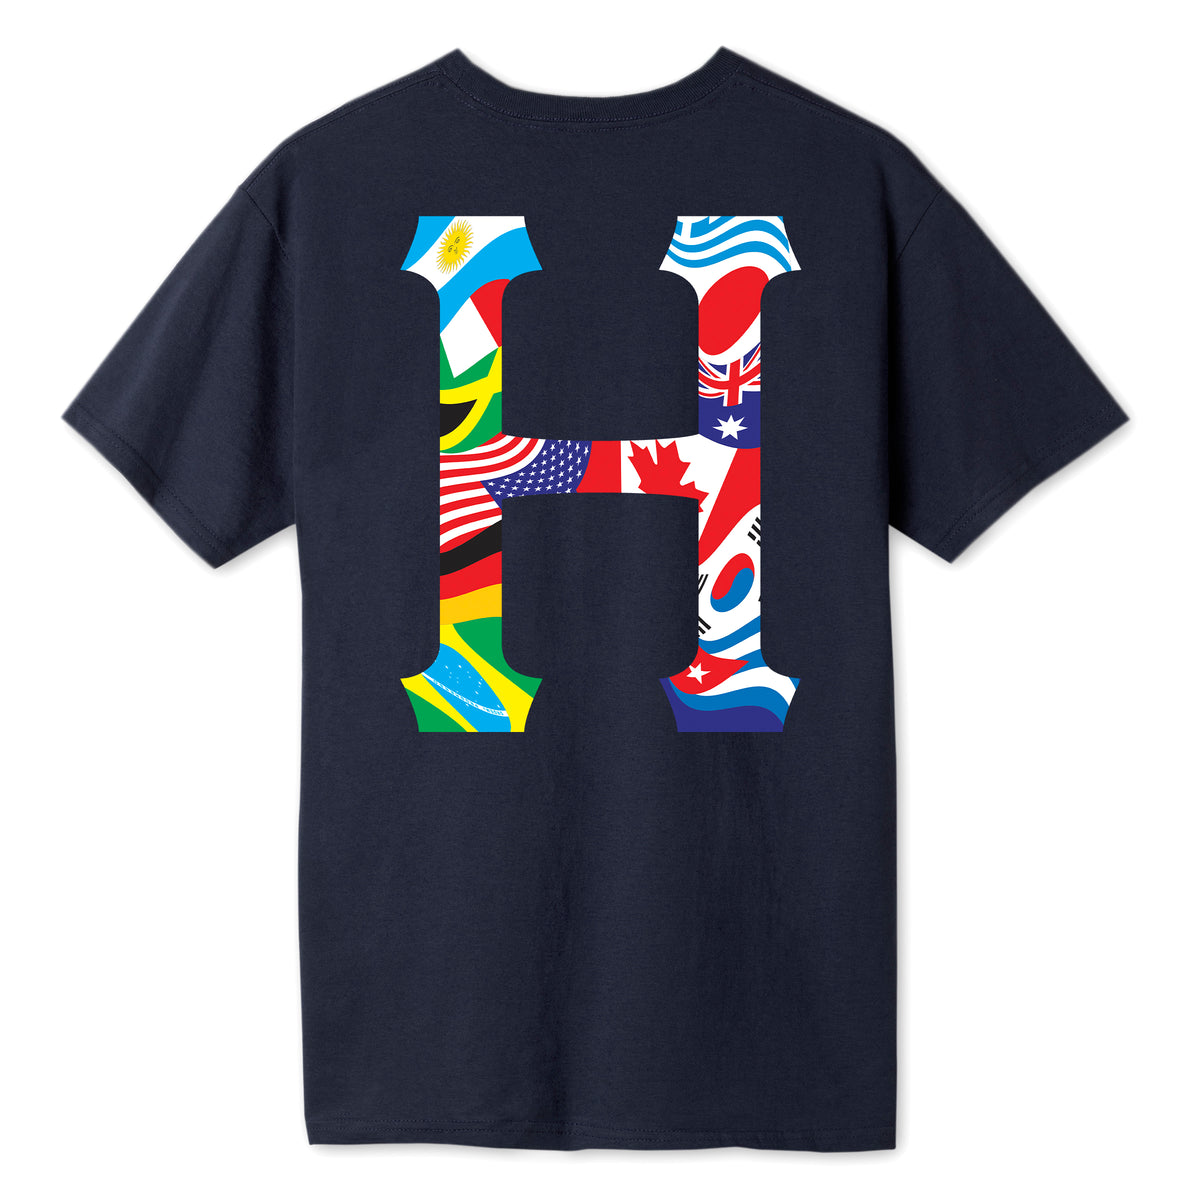 HUF - Global Trip Classic H Men's Tee, French Navy